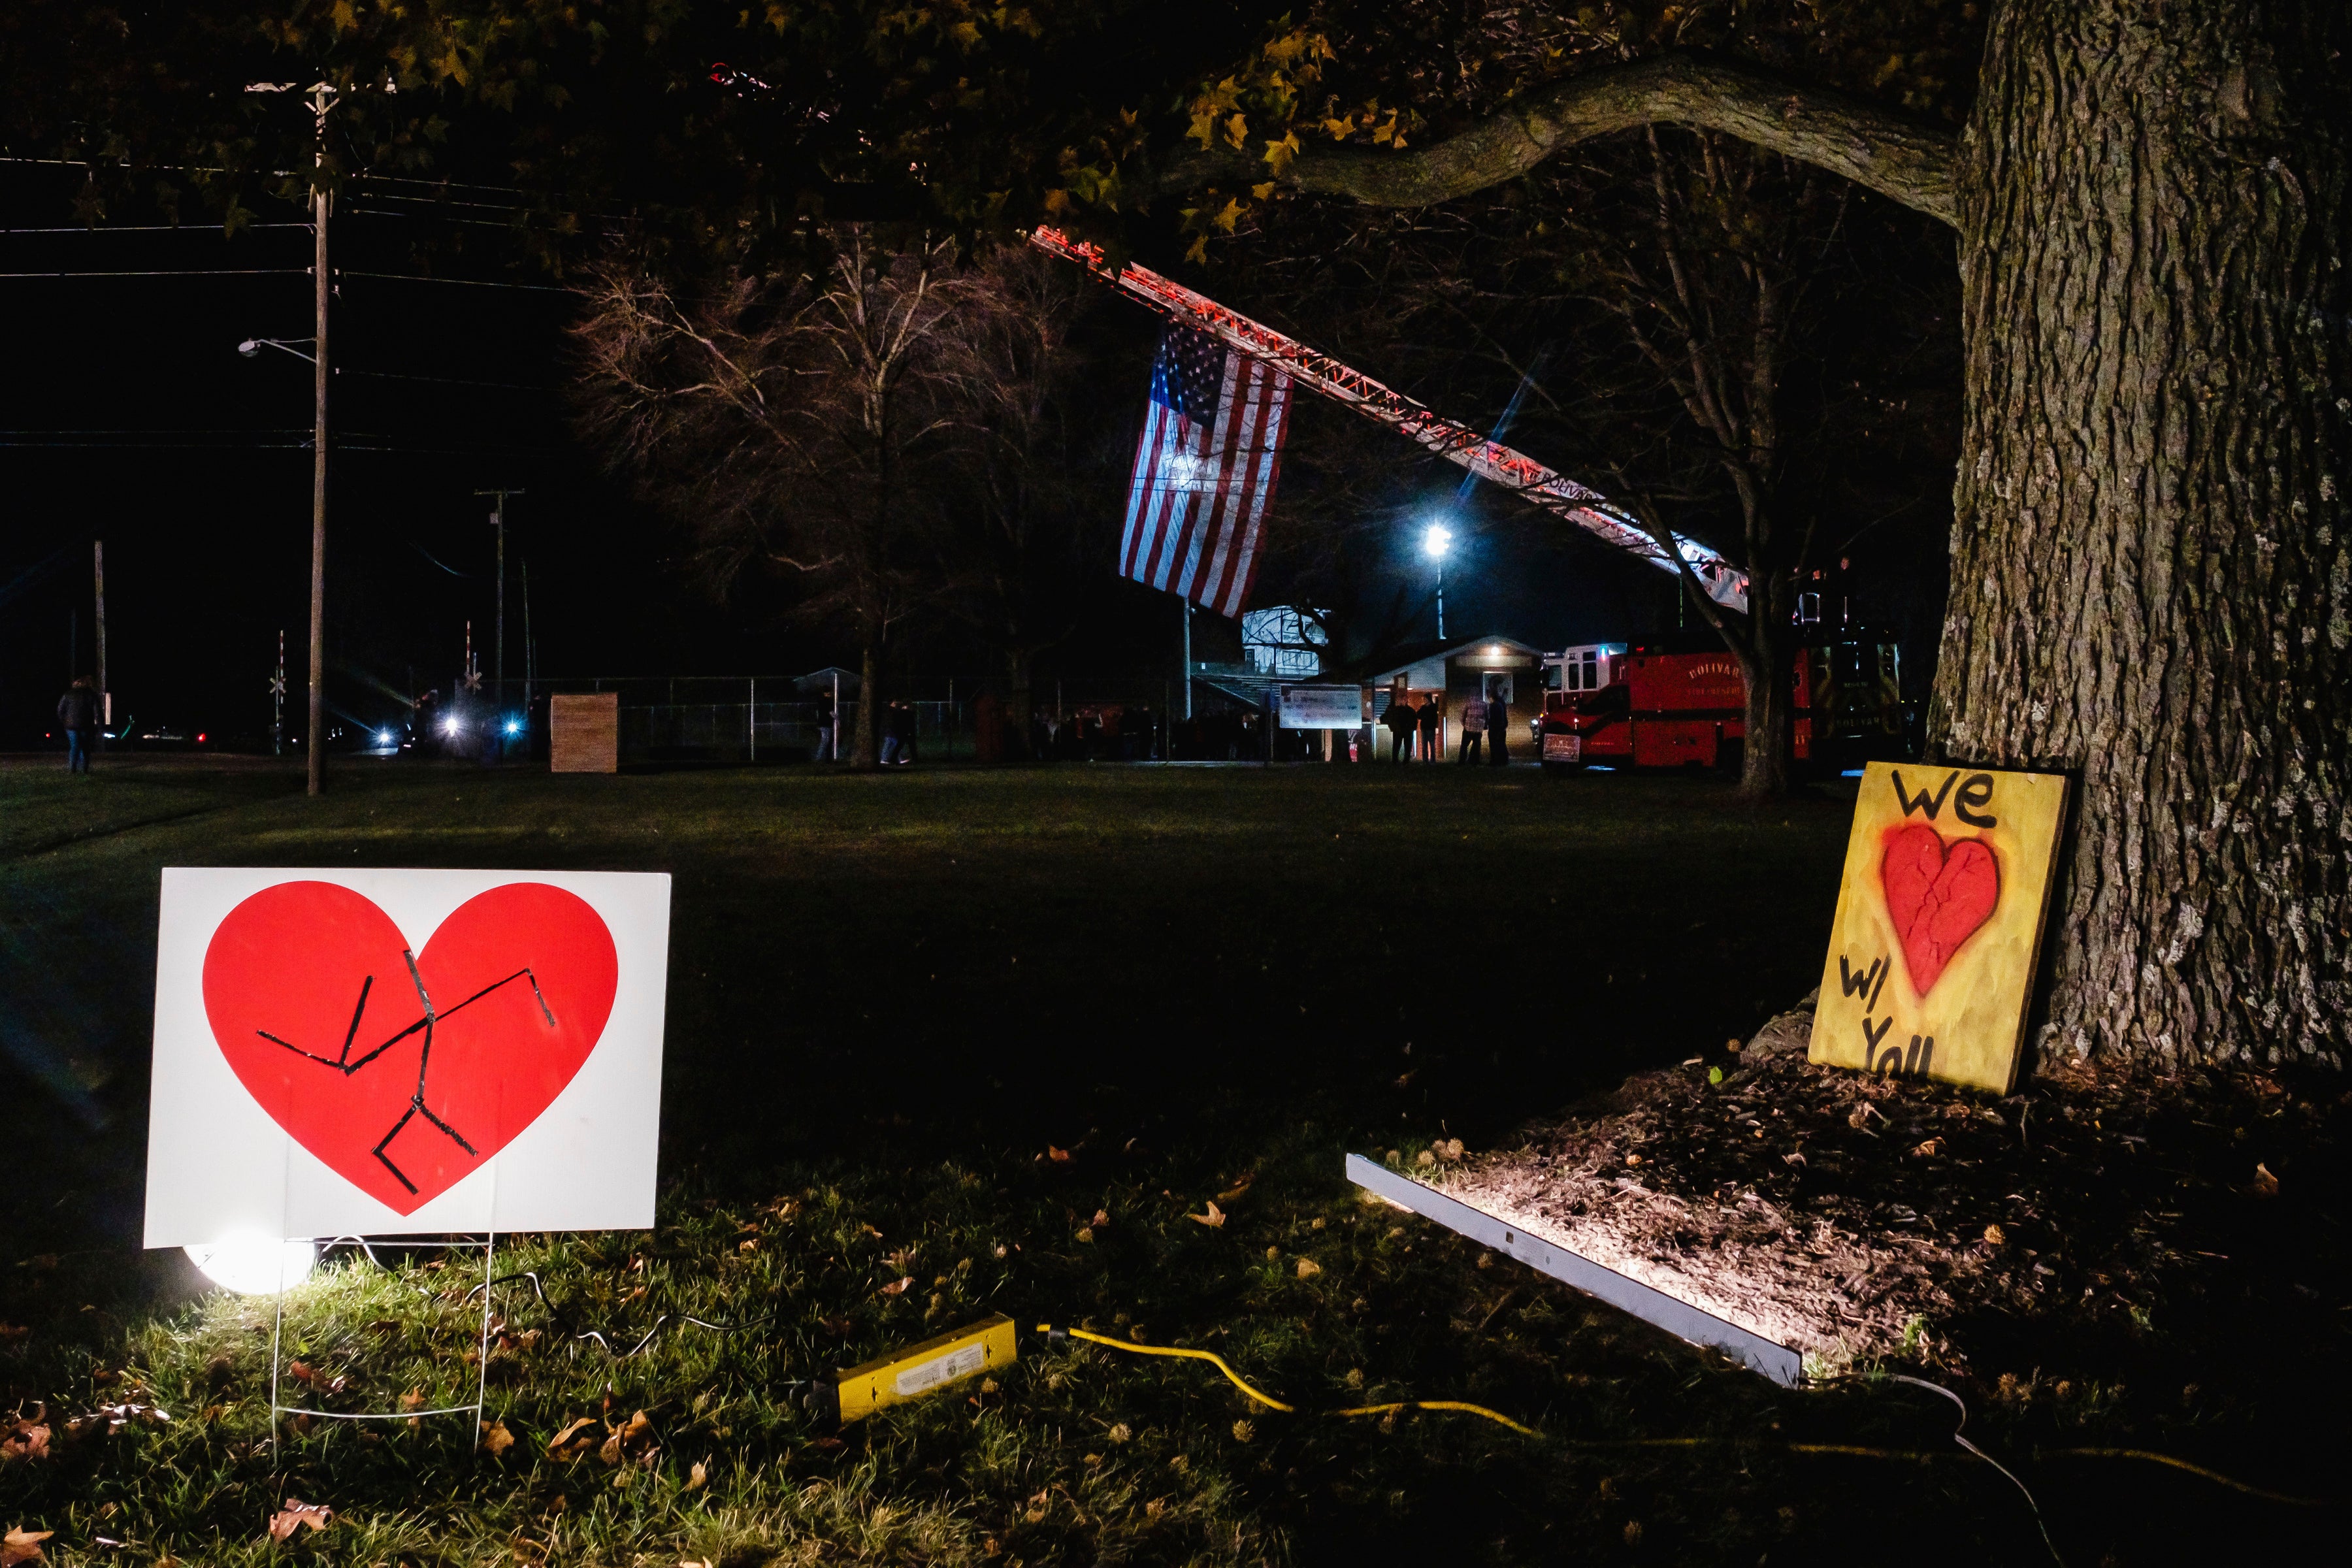 Signs in support of the Tusky Valley Schools community can be seen in front of the elementary school shortly before a community prayer vigil after Ohio bus crash